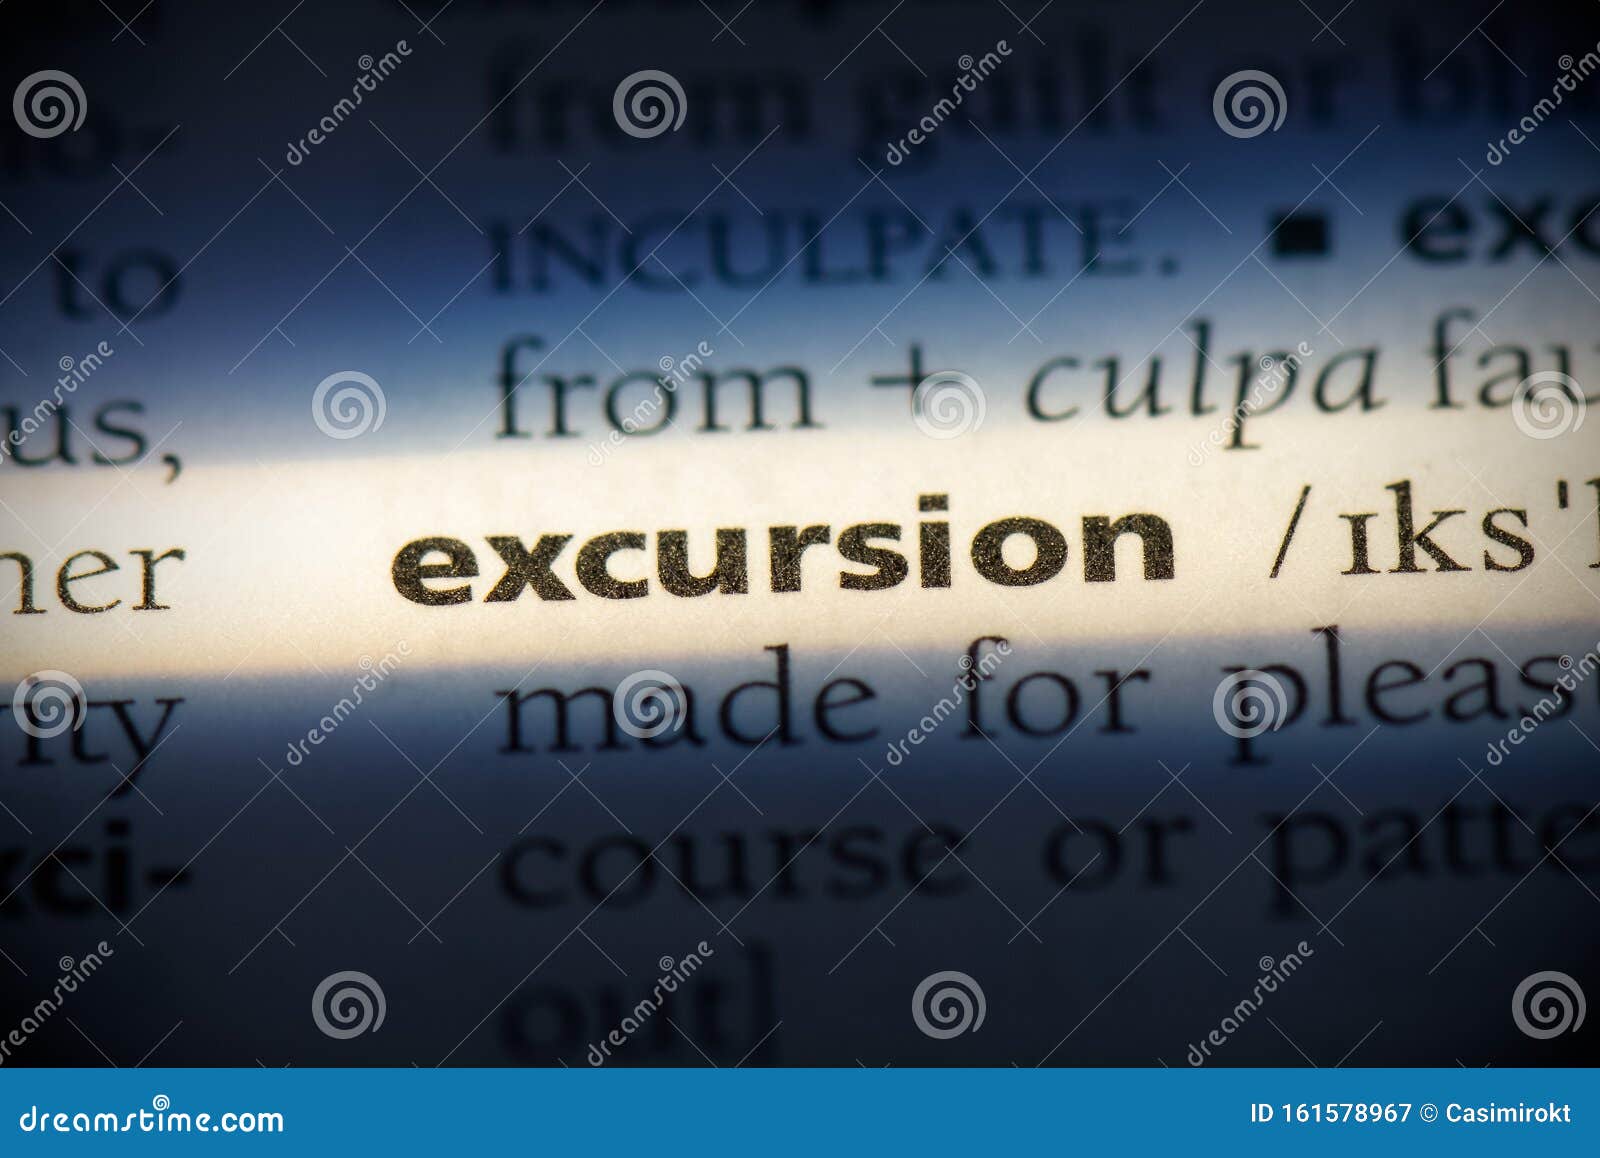 excursion in law definition